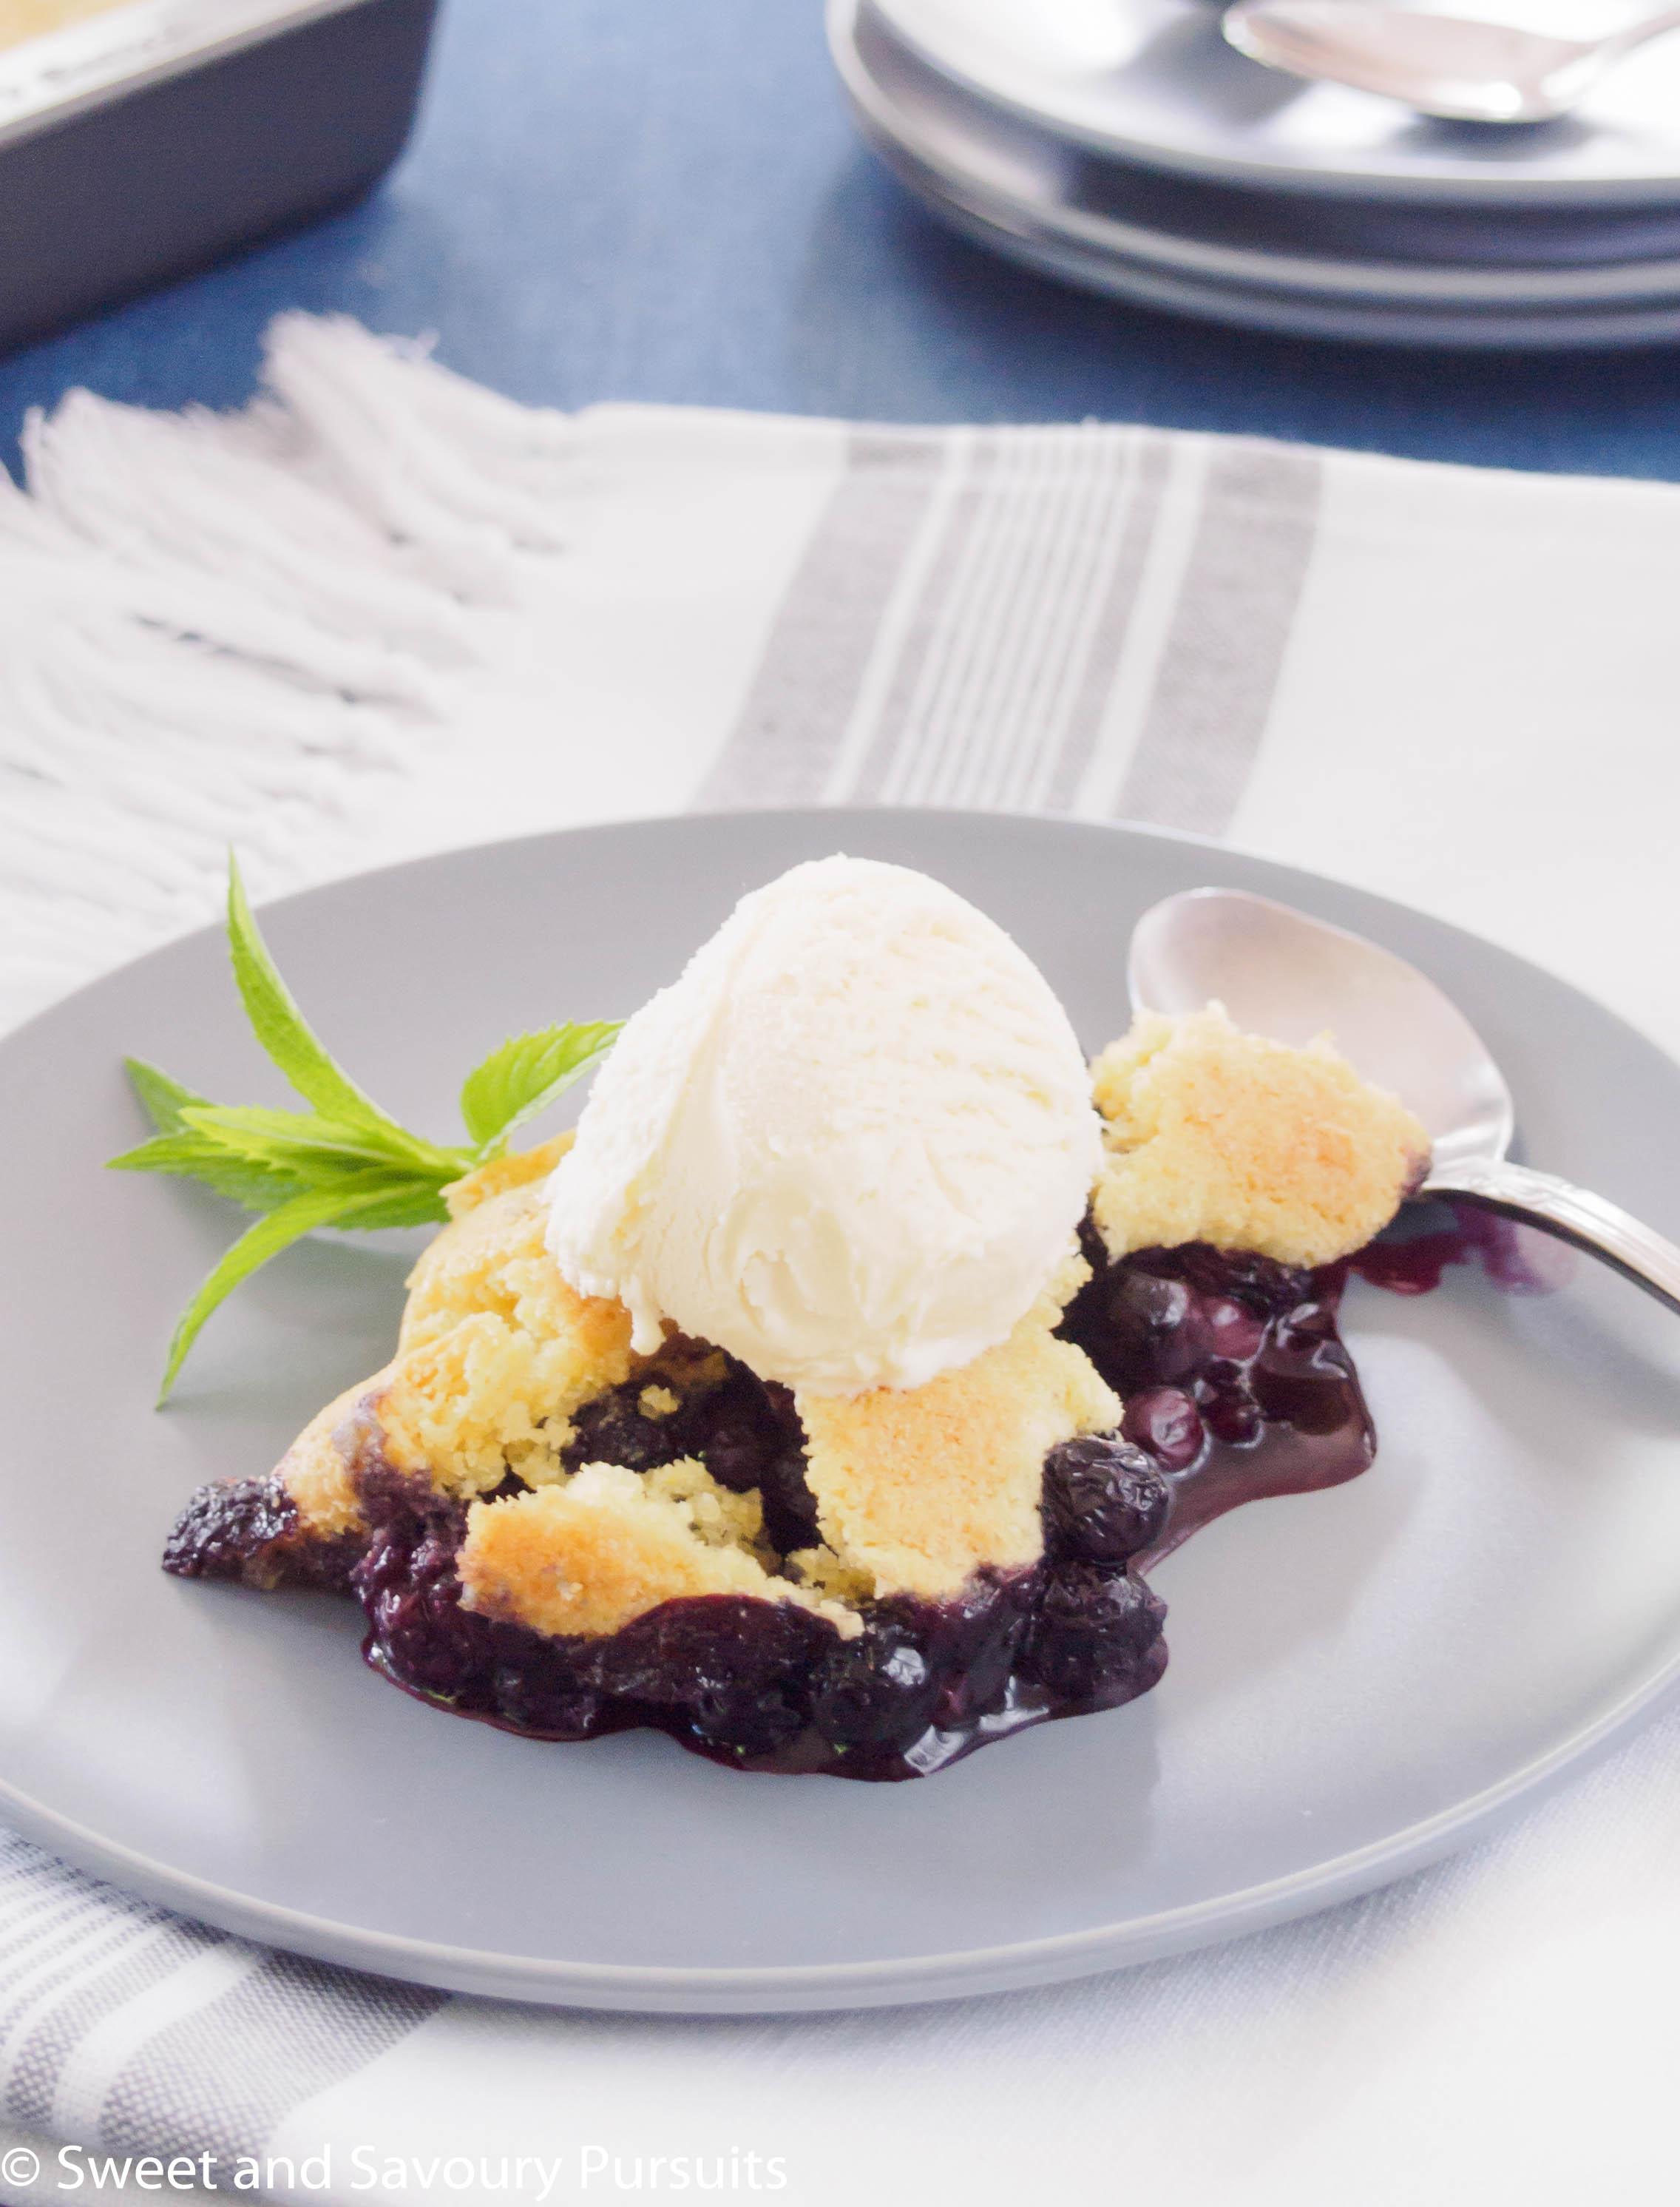 Blueberry cobbler topped with a scoop of vanilla ice cream.